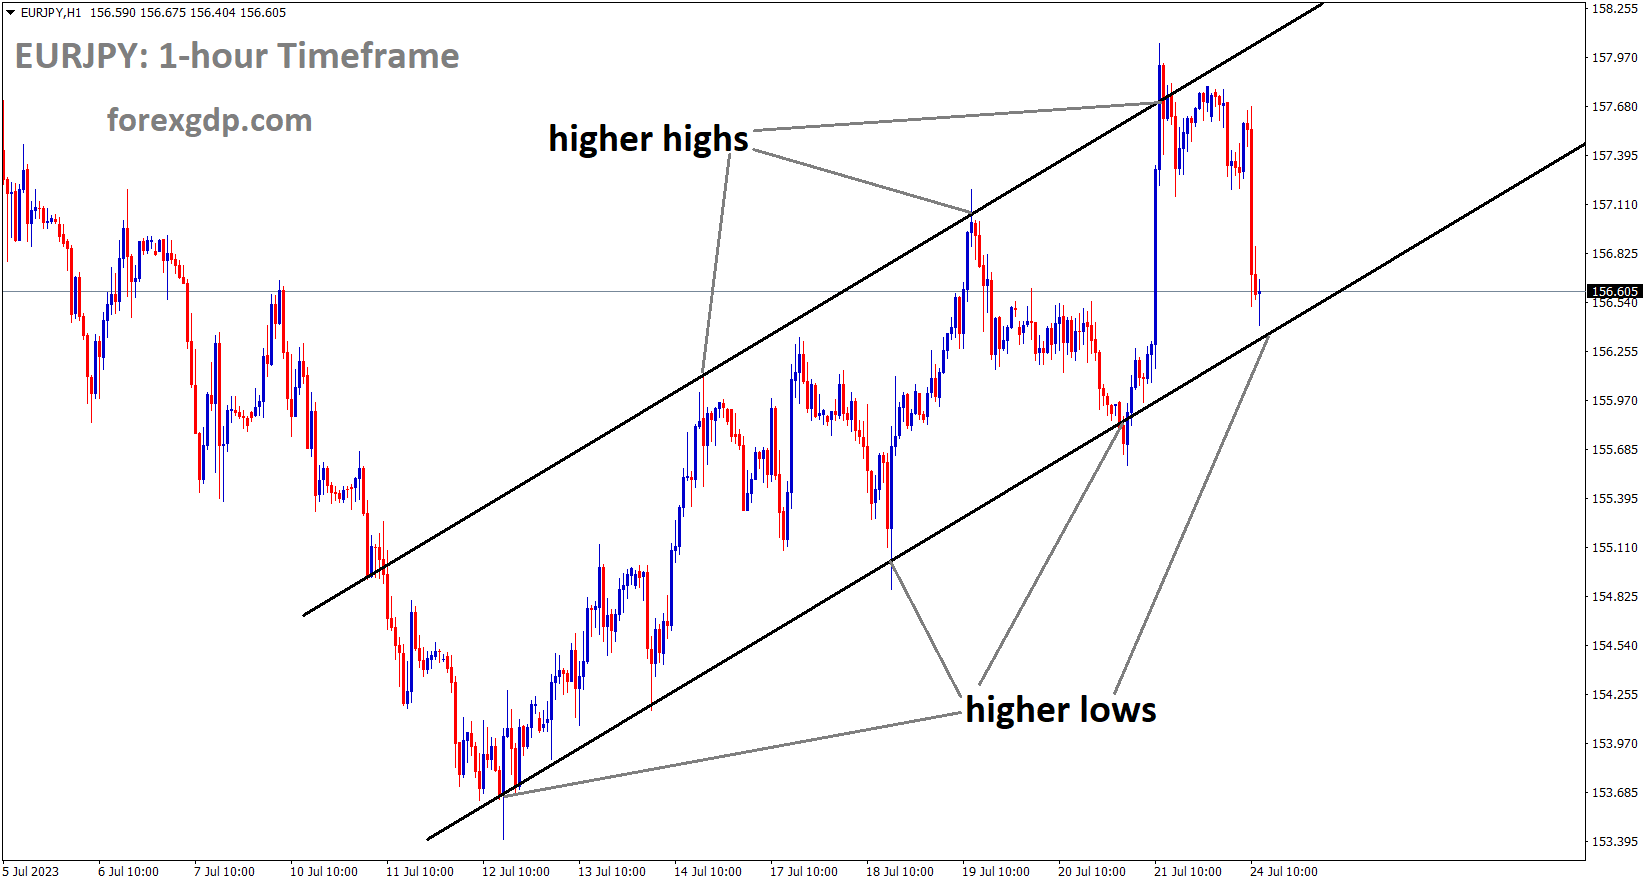 EURJPY is moving in an Ascending channel and the market has reached the higher low area of the channel 2